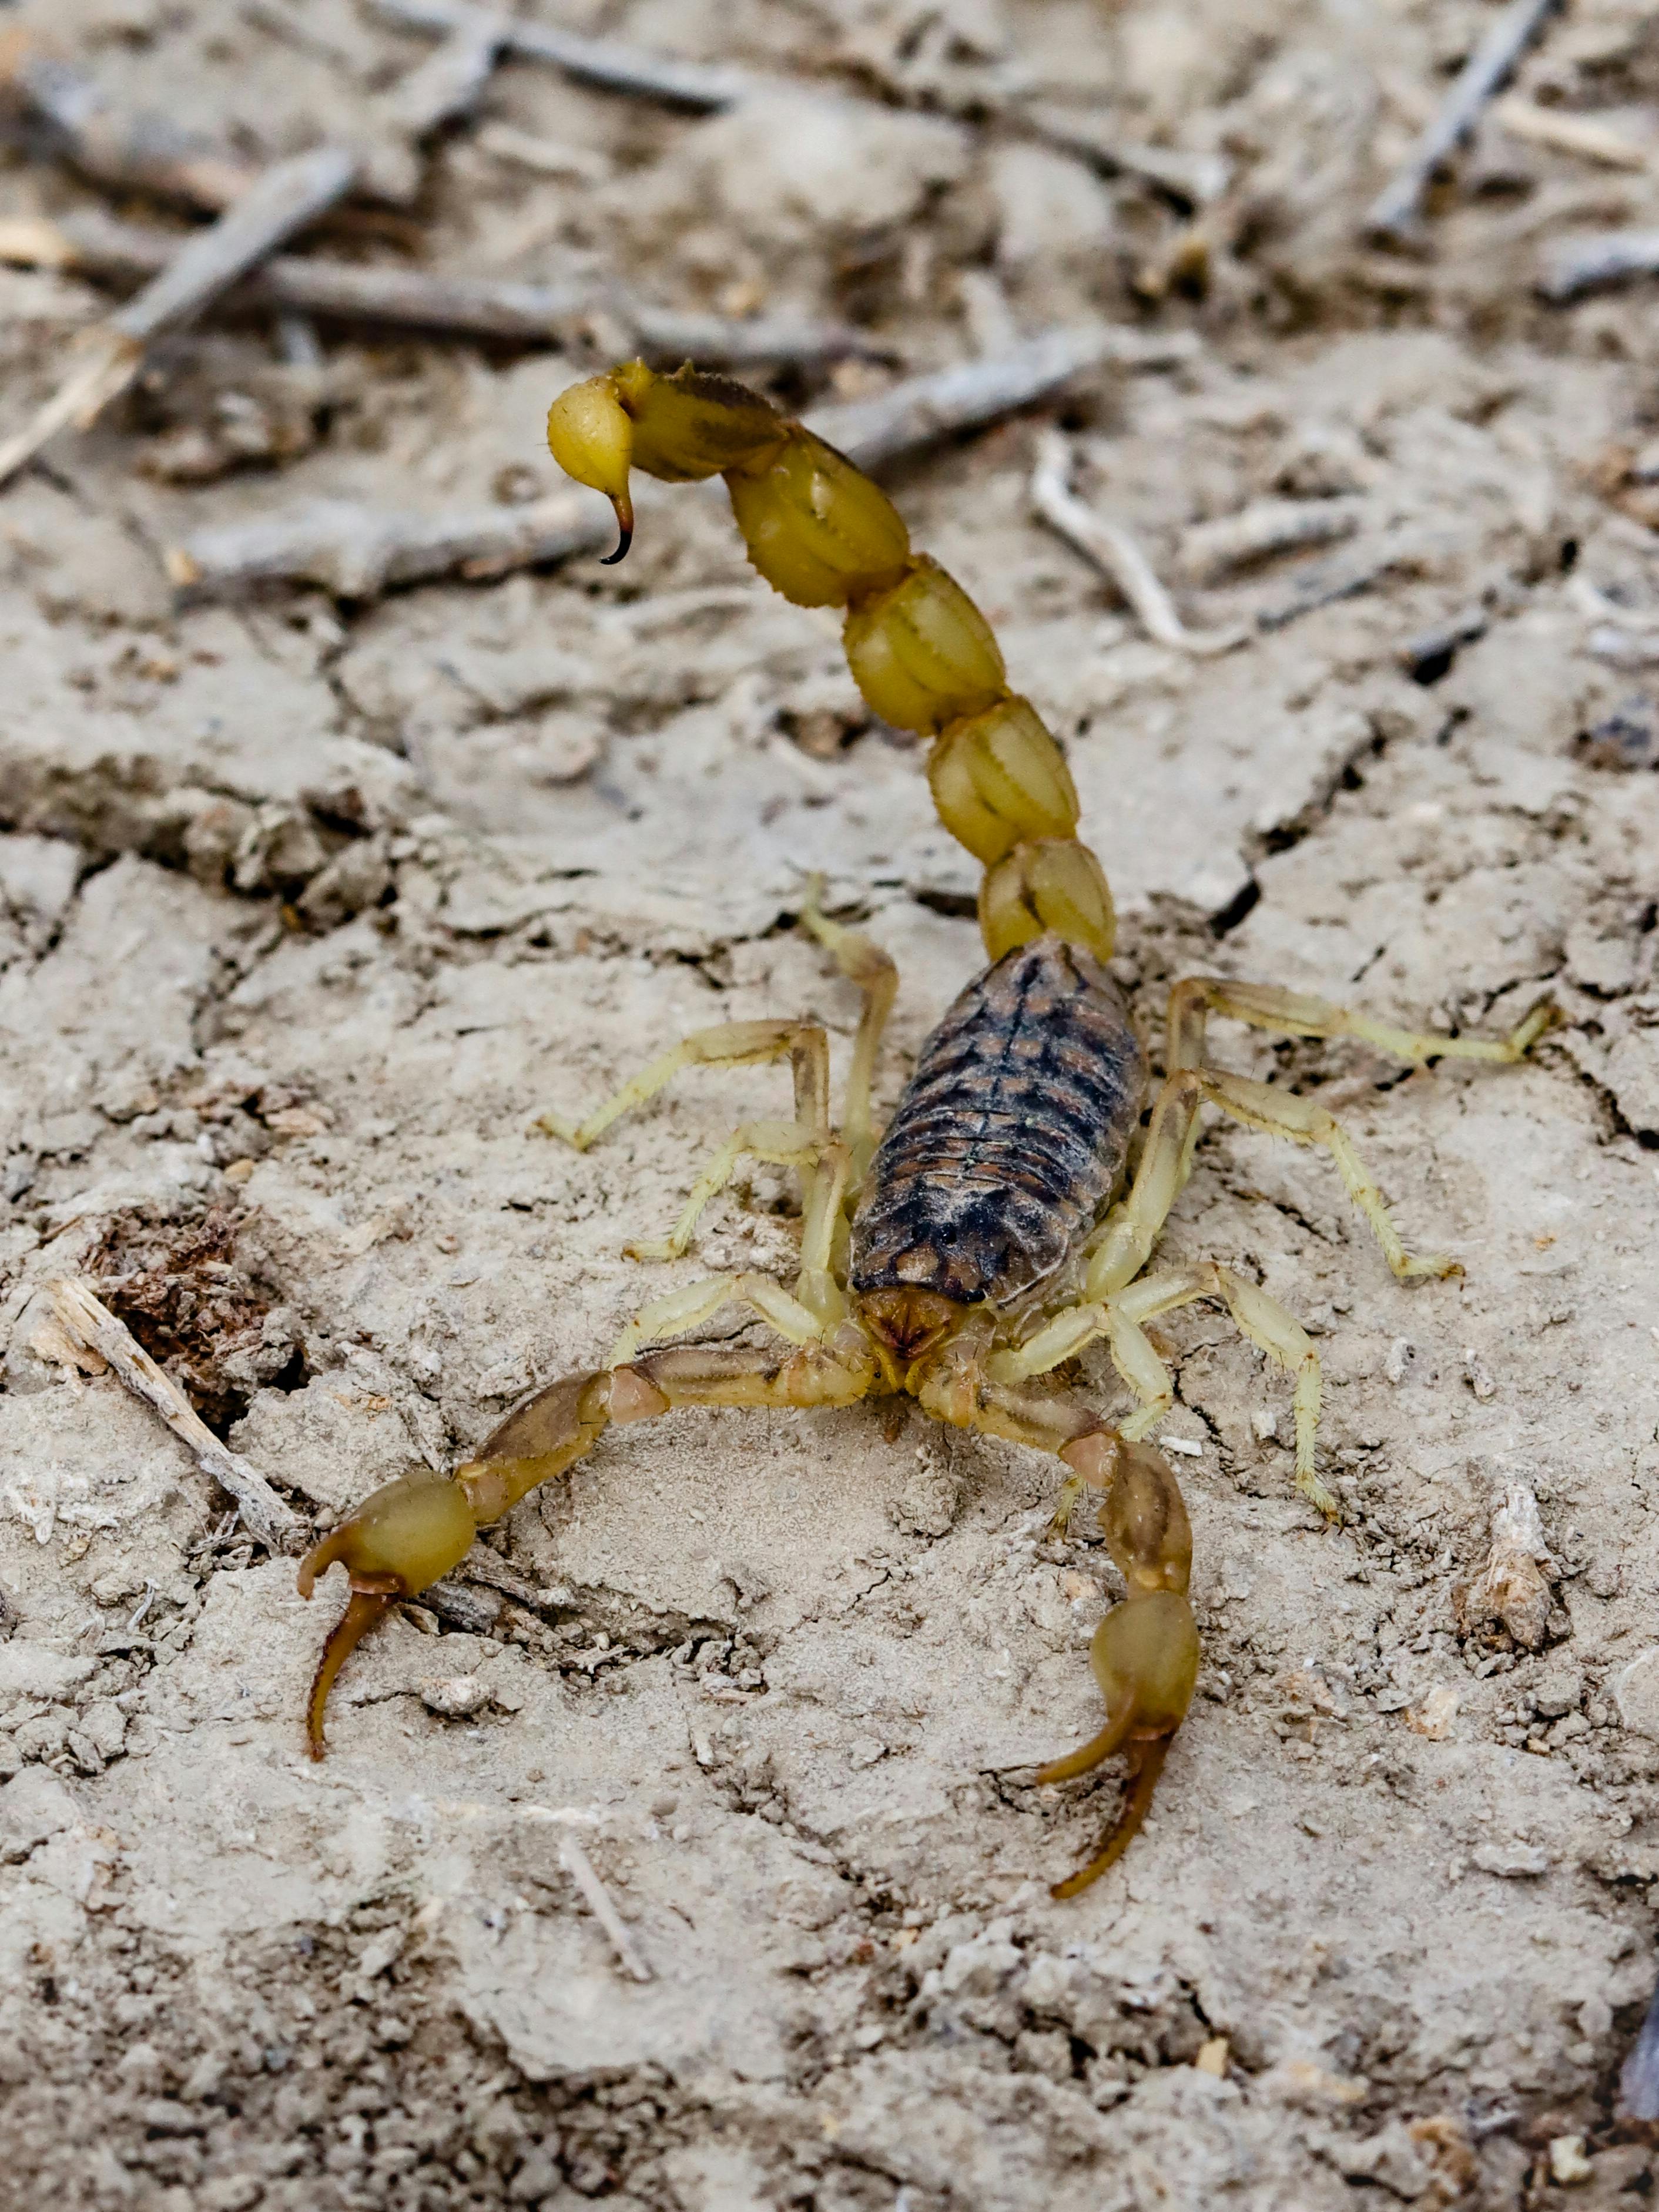 Scorpion Images and Stock Photos. 11,529 Scorpion photography and royalty  free pictures available to download from thousands of stock photo providers.